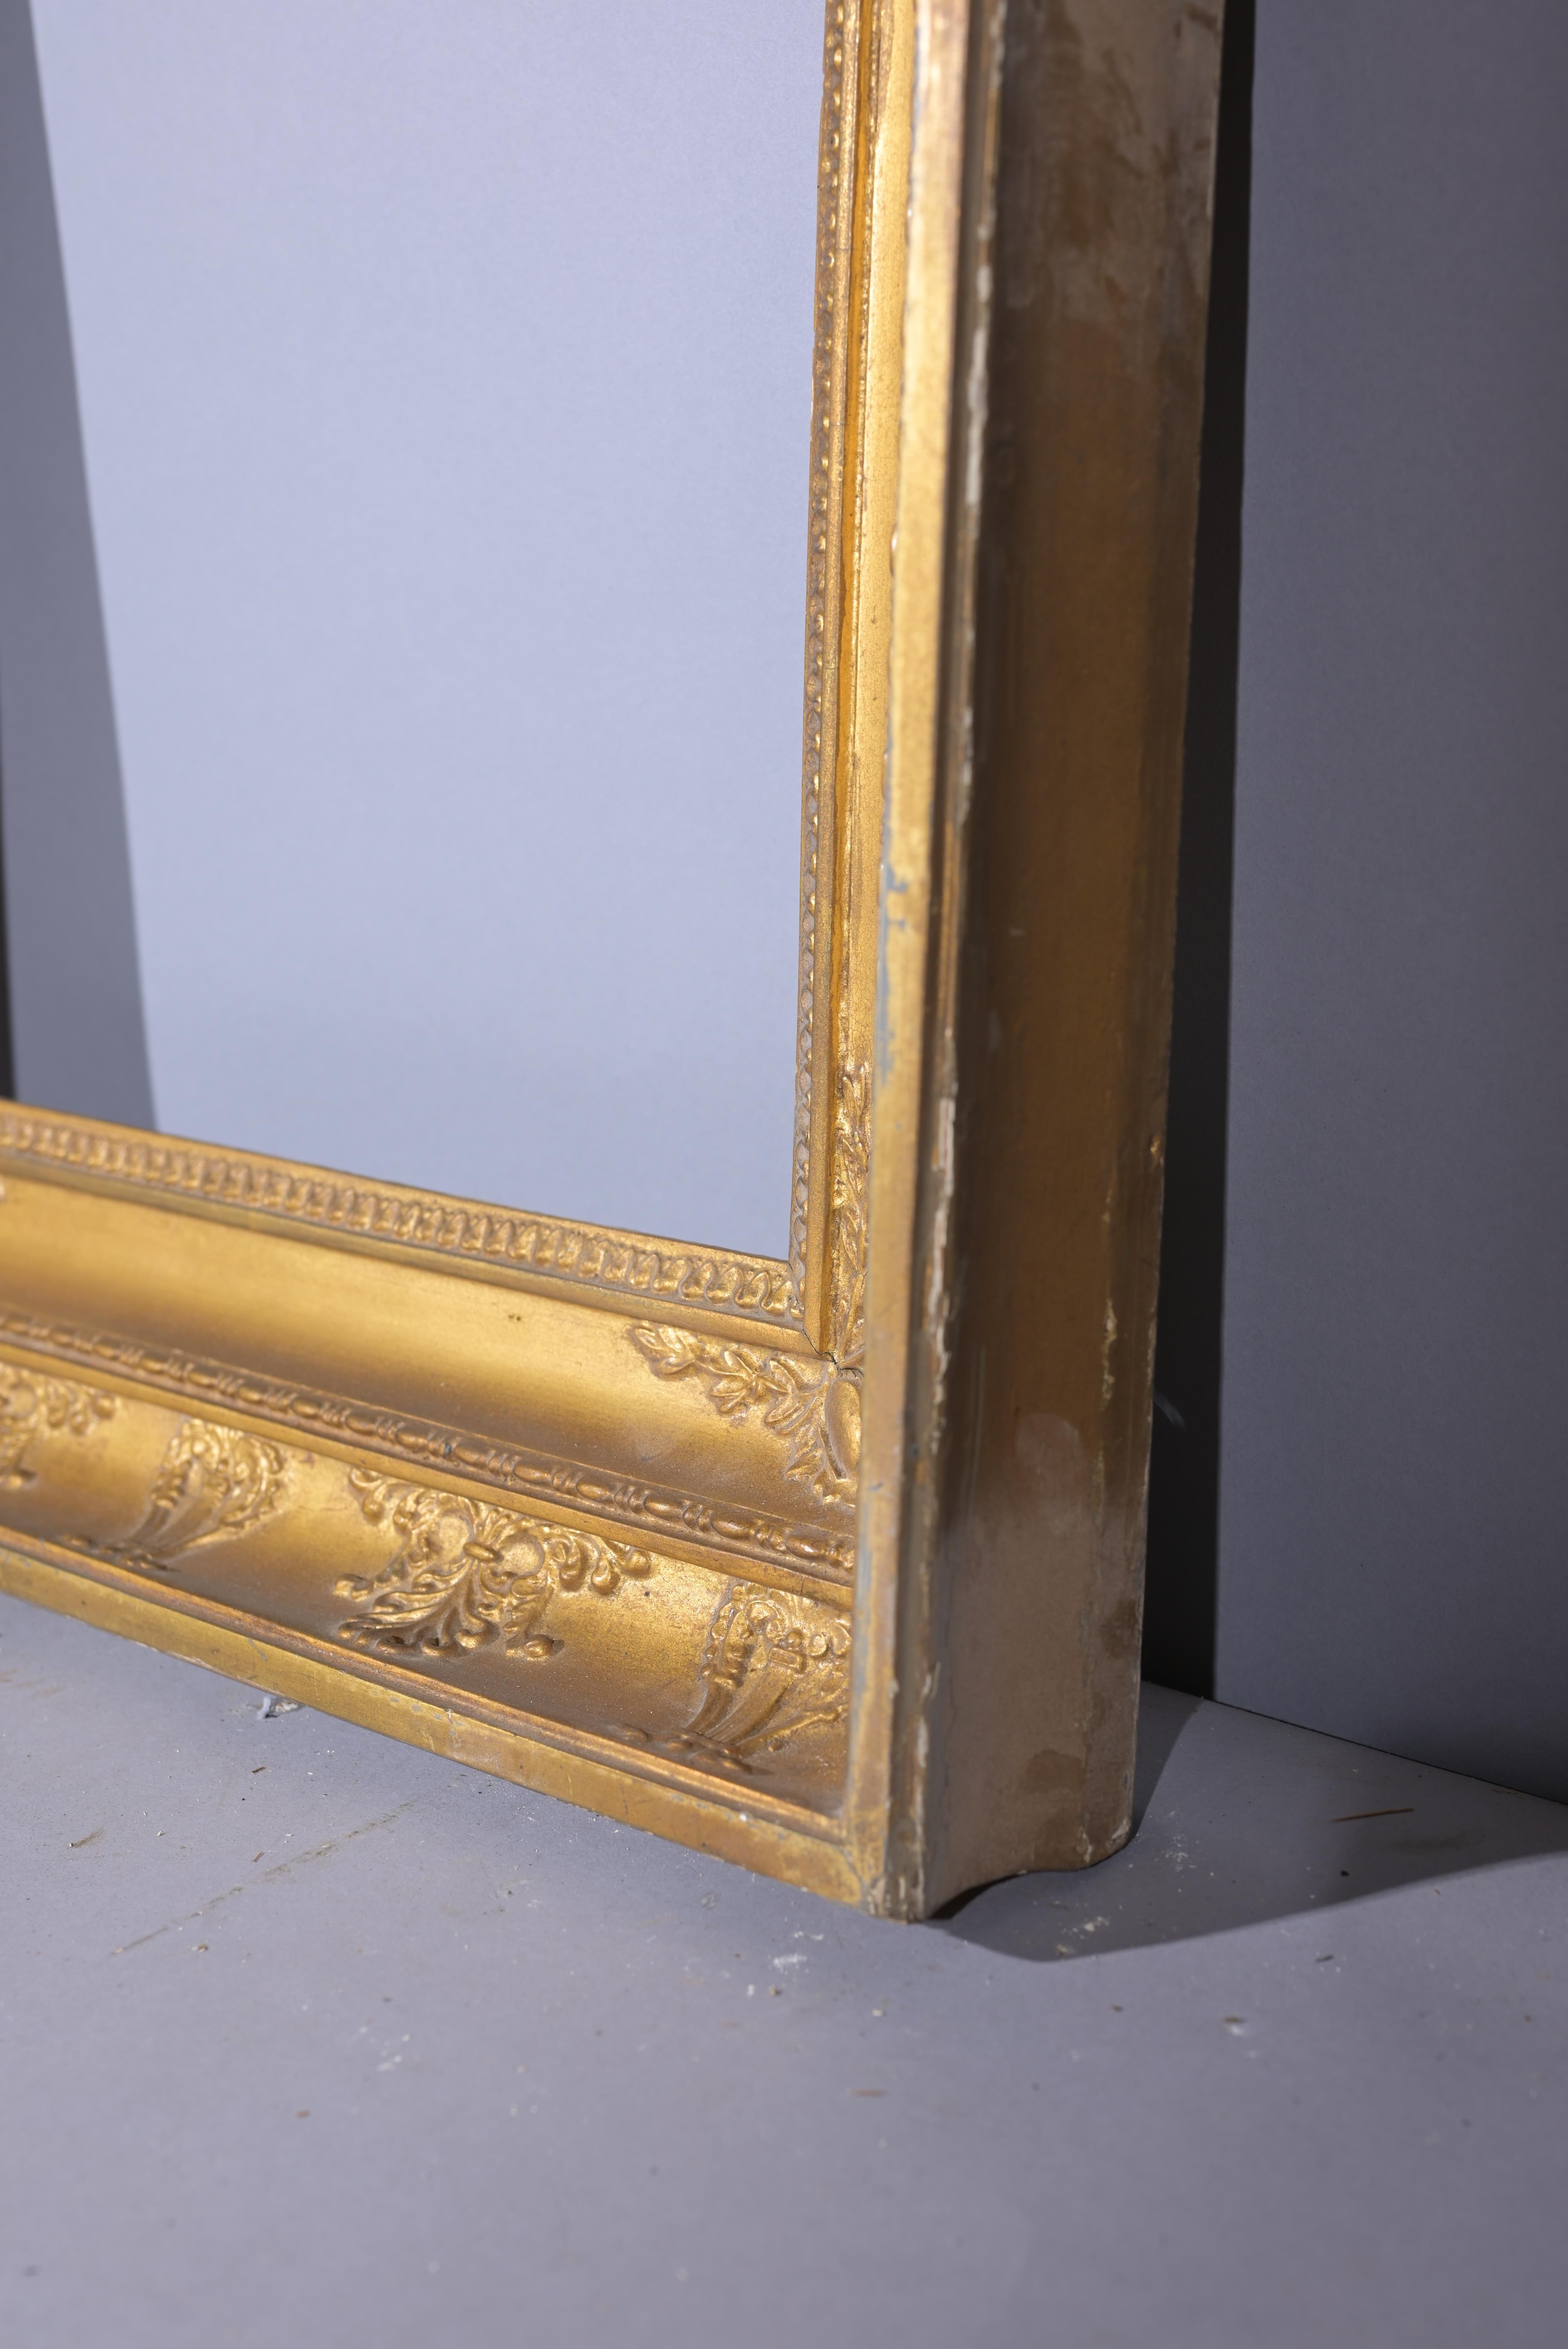 Ameican Gilt/Wood Frame- 16 x 13 - Image 6 of 7